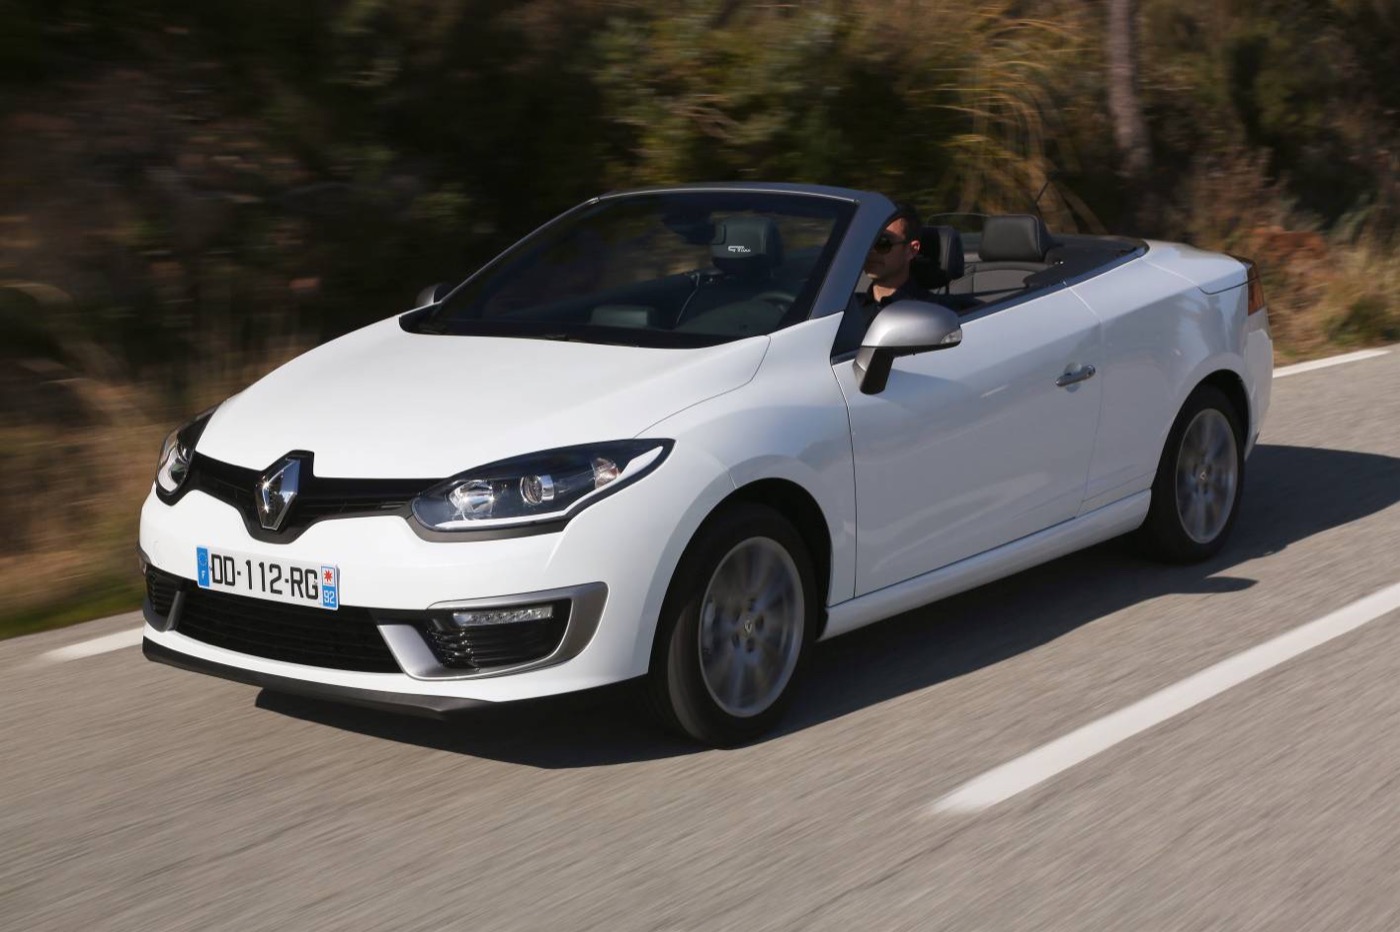 Review - 2015 Renault Megane Coupe-Cabriolet GT-Line Review